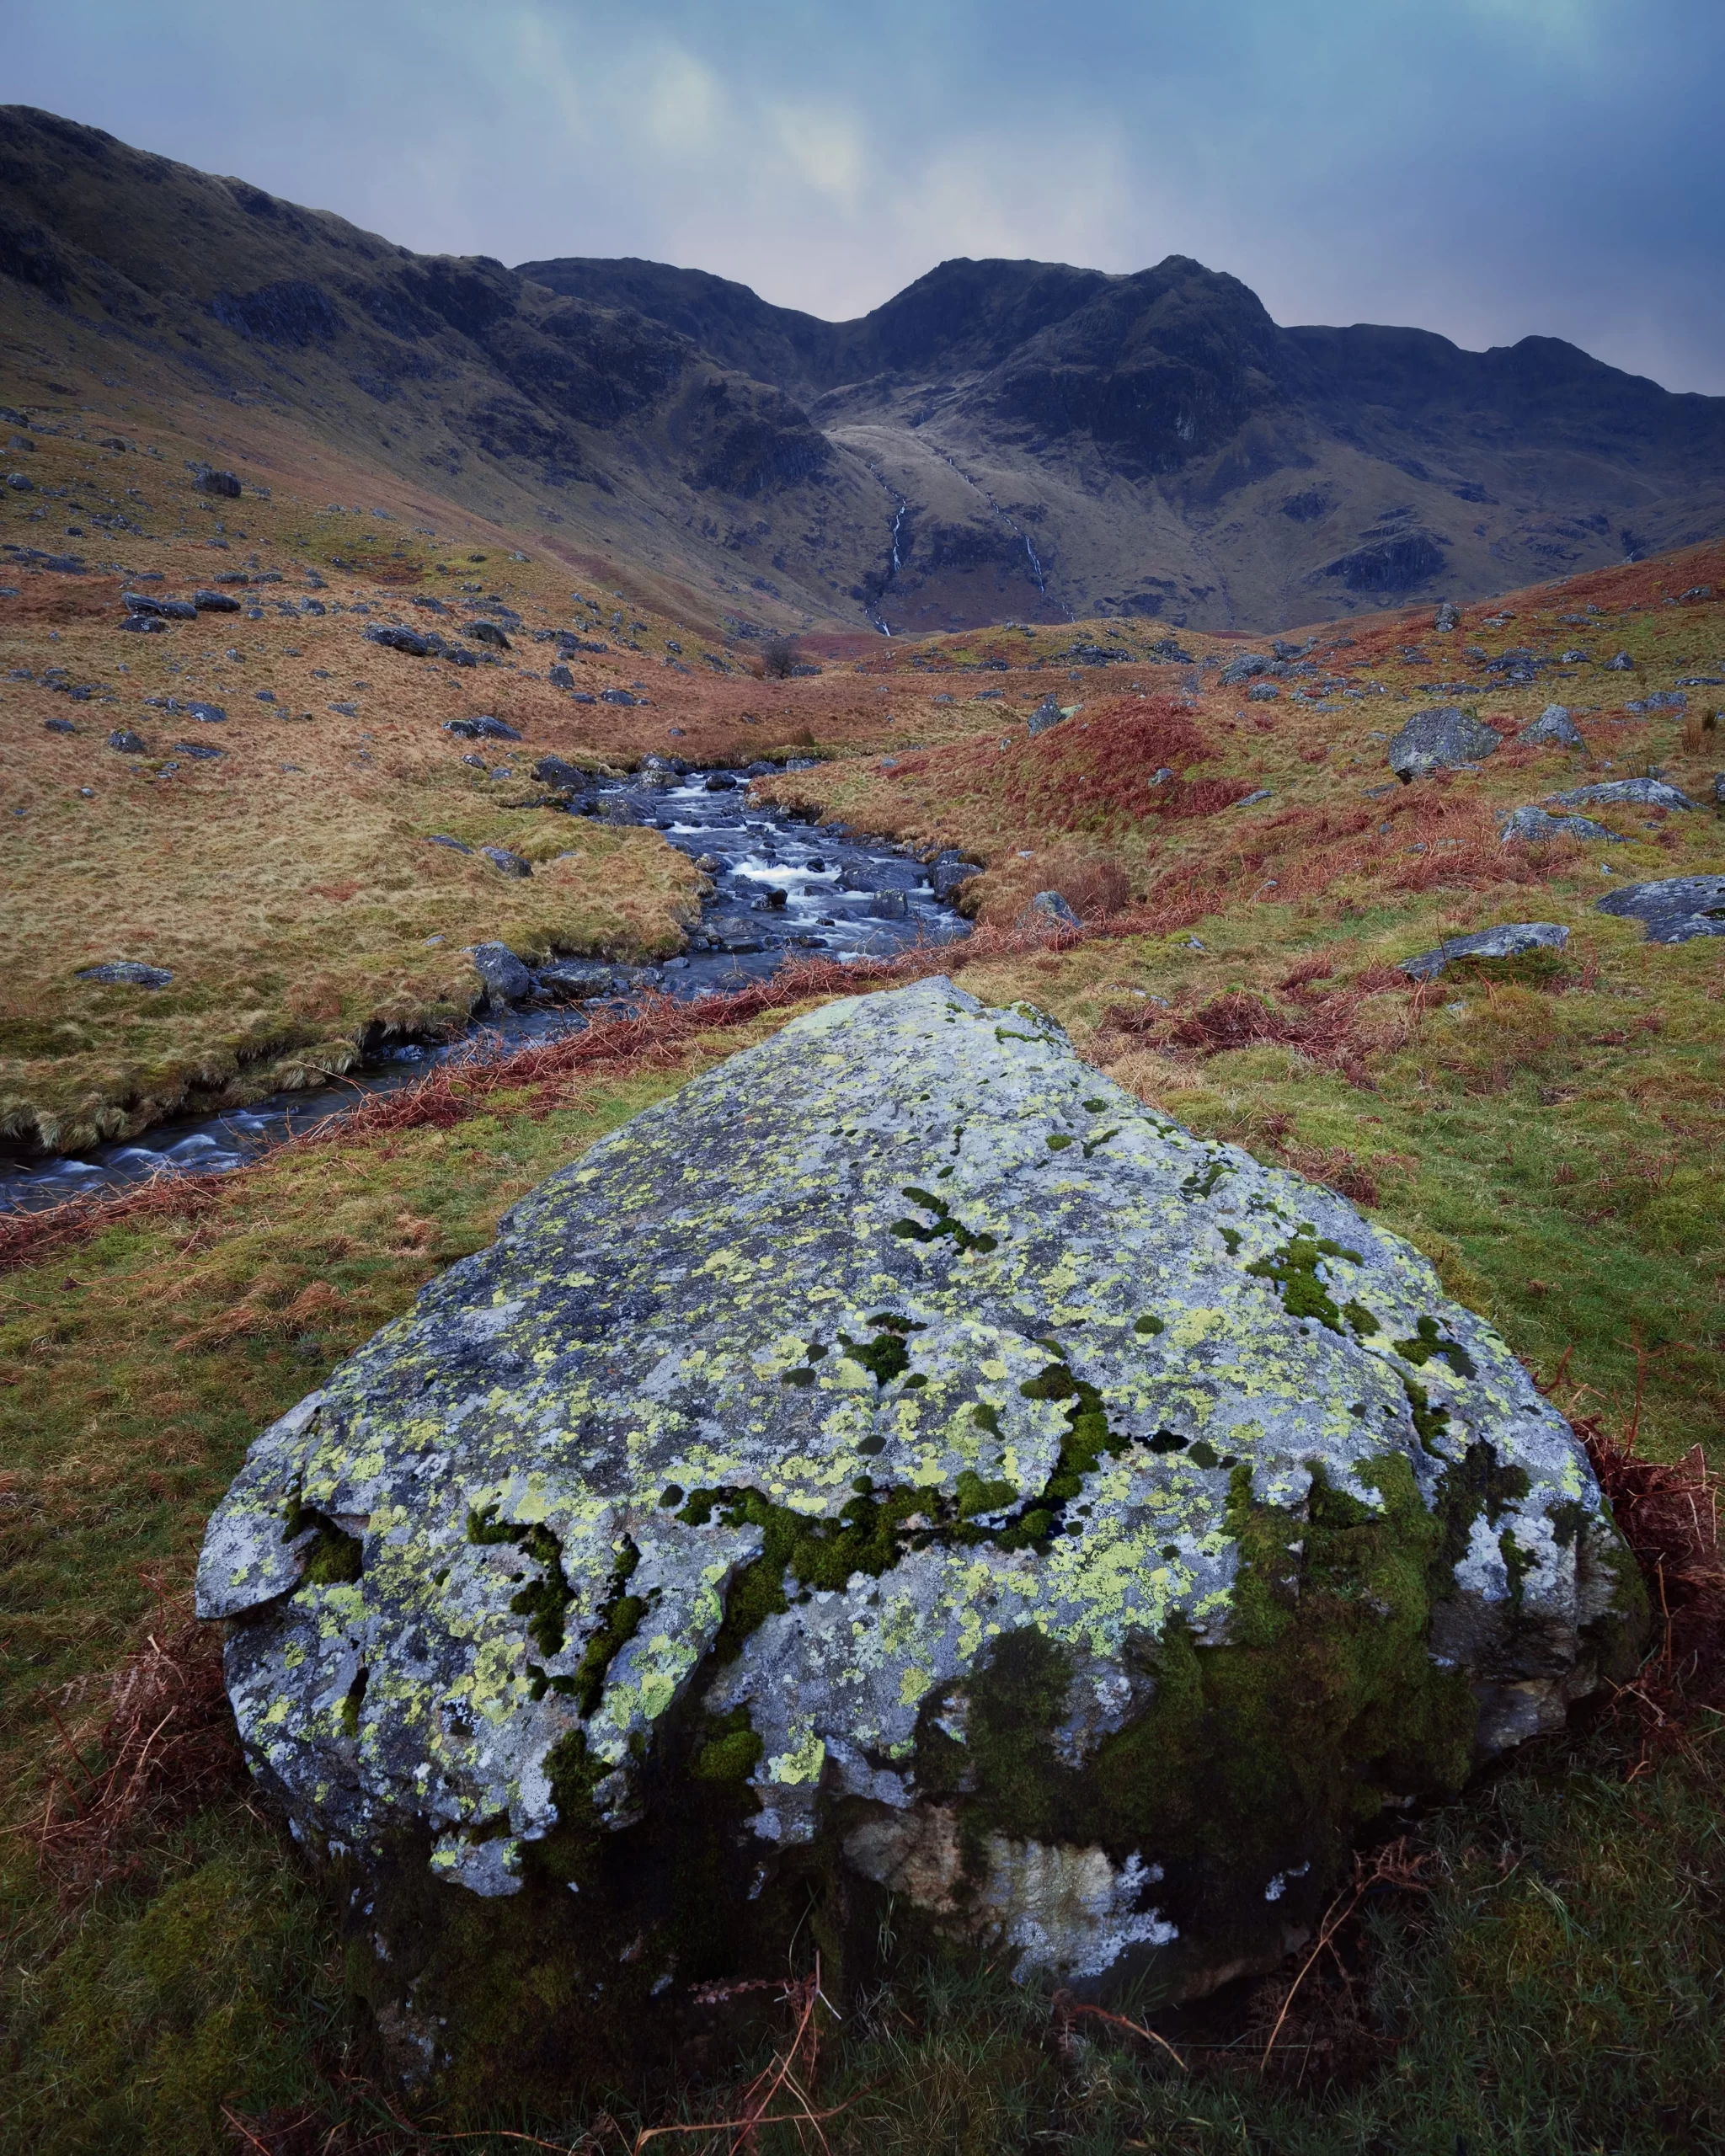 Deepdale, Patterdale, England Published on January 14, 2019 Sigma, dp0 Quattro Free to use under the Unsplash License Powerful winds and passing squalls as Lisabet and I hiked up Deepdale for photos of Greenhow End. I managed to snag this shot. Later, the wind took me flat cap off me head!